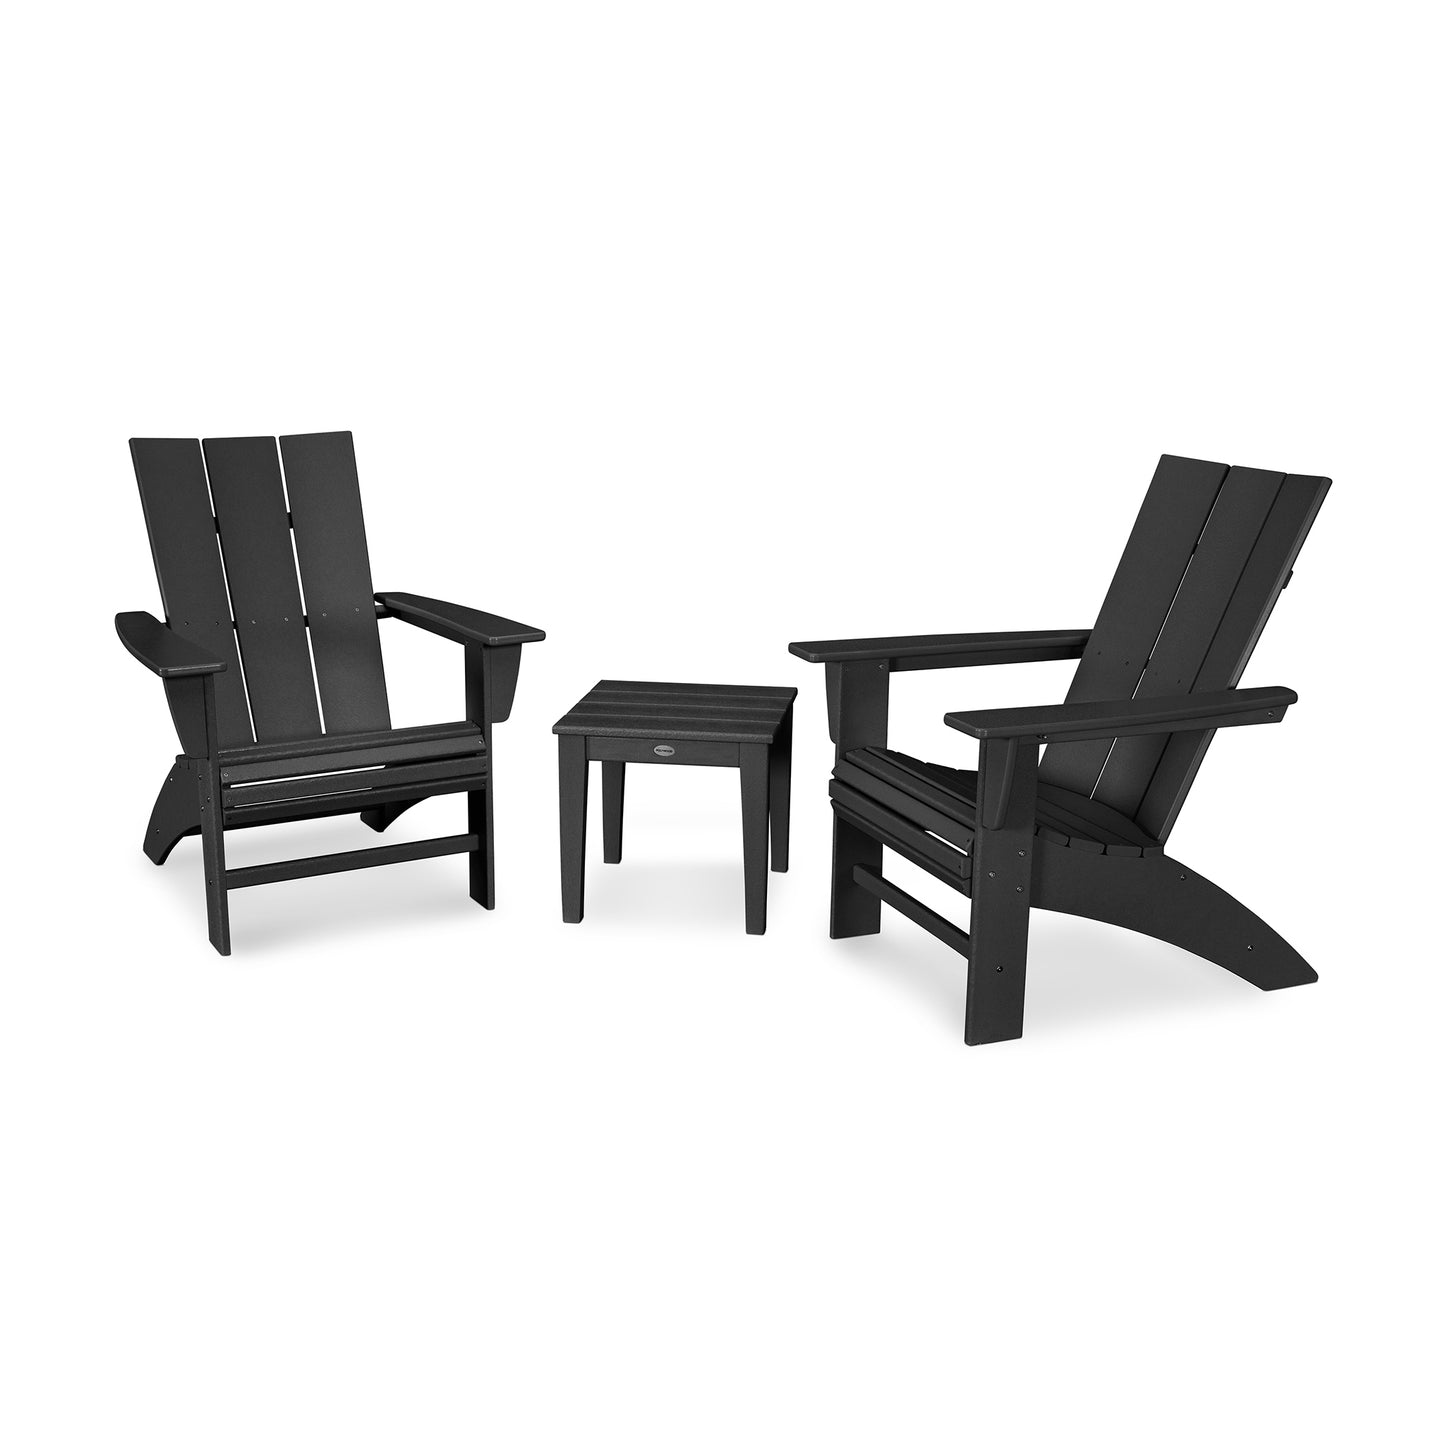 Two black POLYWOOD Modern Curveback Adirondack chairs and a small matching side table arranged on a white background. The chairs face slightly towards each other, suggesting a conversational setting.